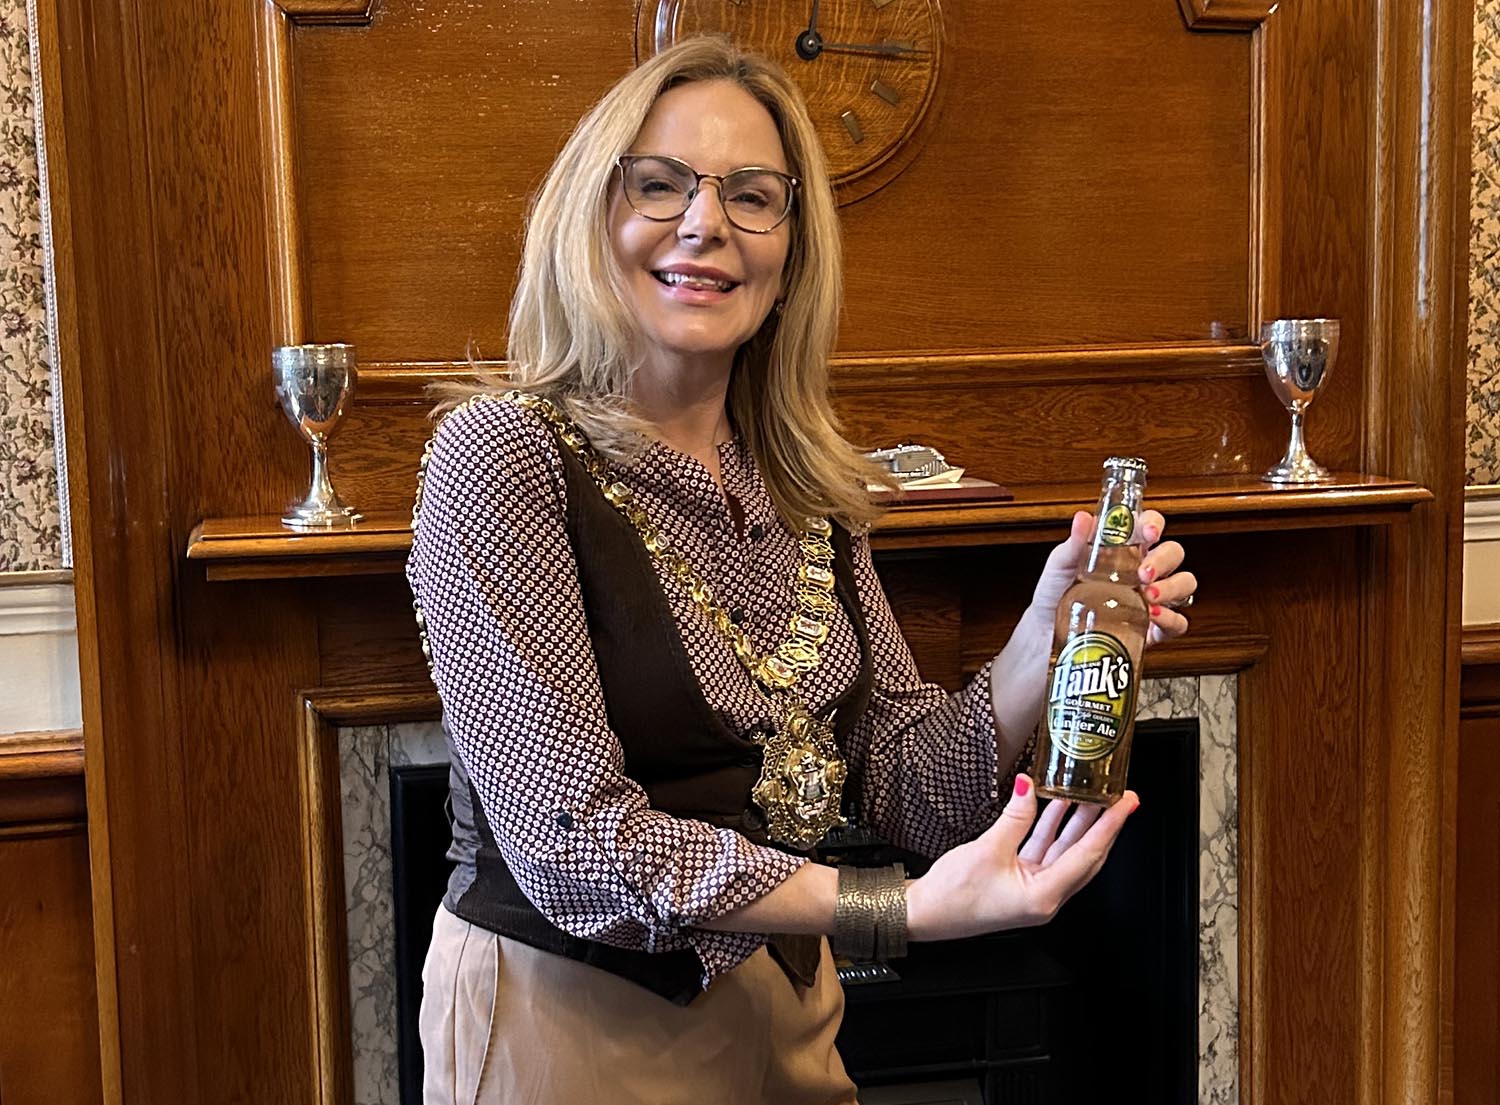 Tina Black -The Lord Mayor of Belfast, Ireland, seen here with a bottle of Hank’s Craft Soda – Irish Style Golden Ginger Ale